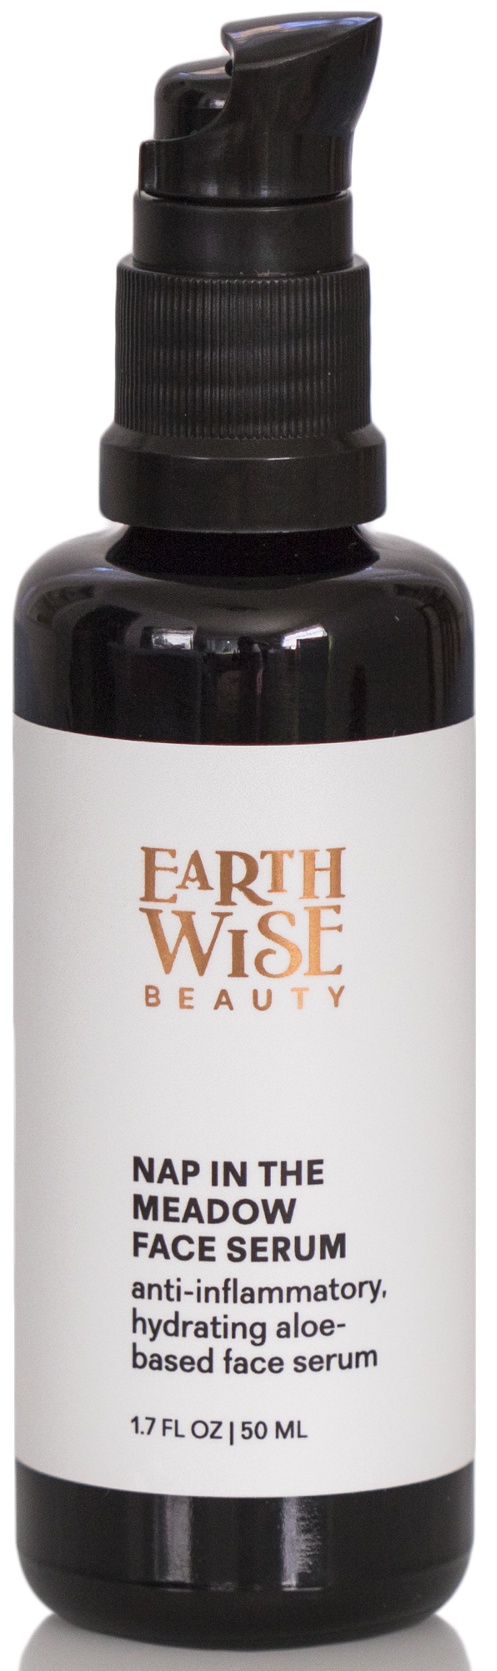 Earthwise Beauty Nap In The Meadow Face Serum